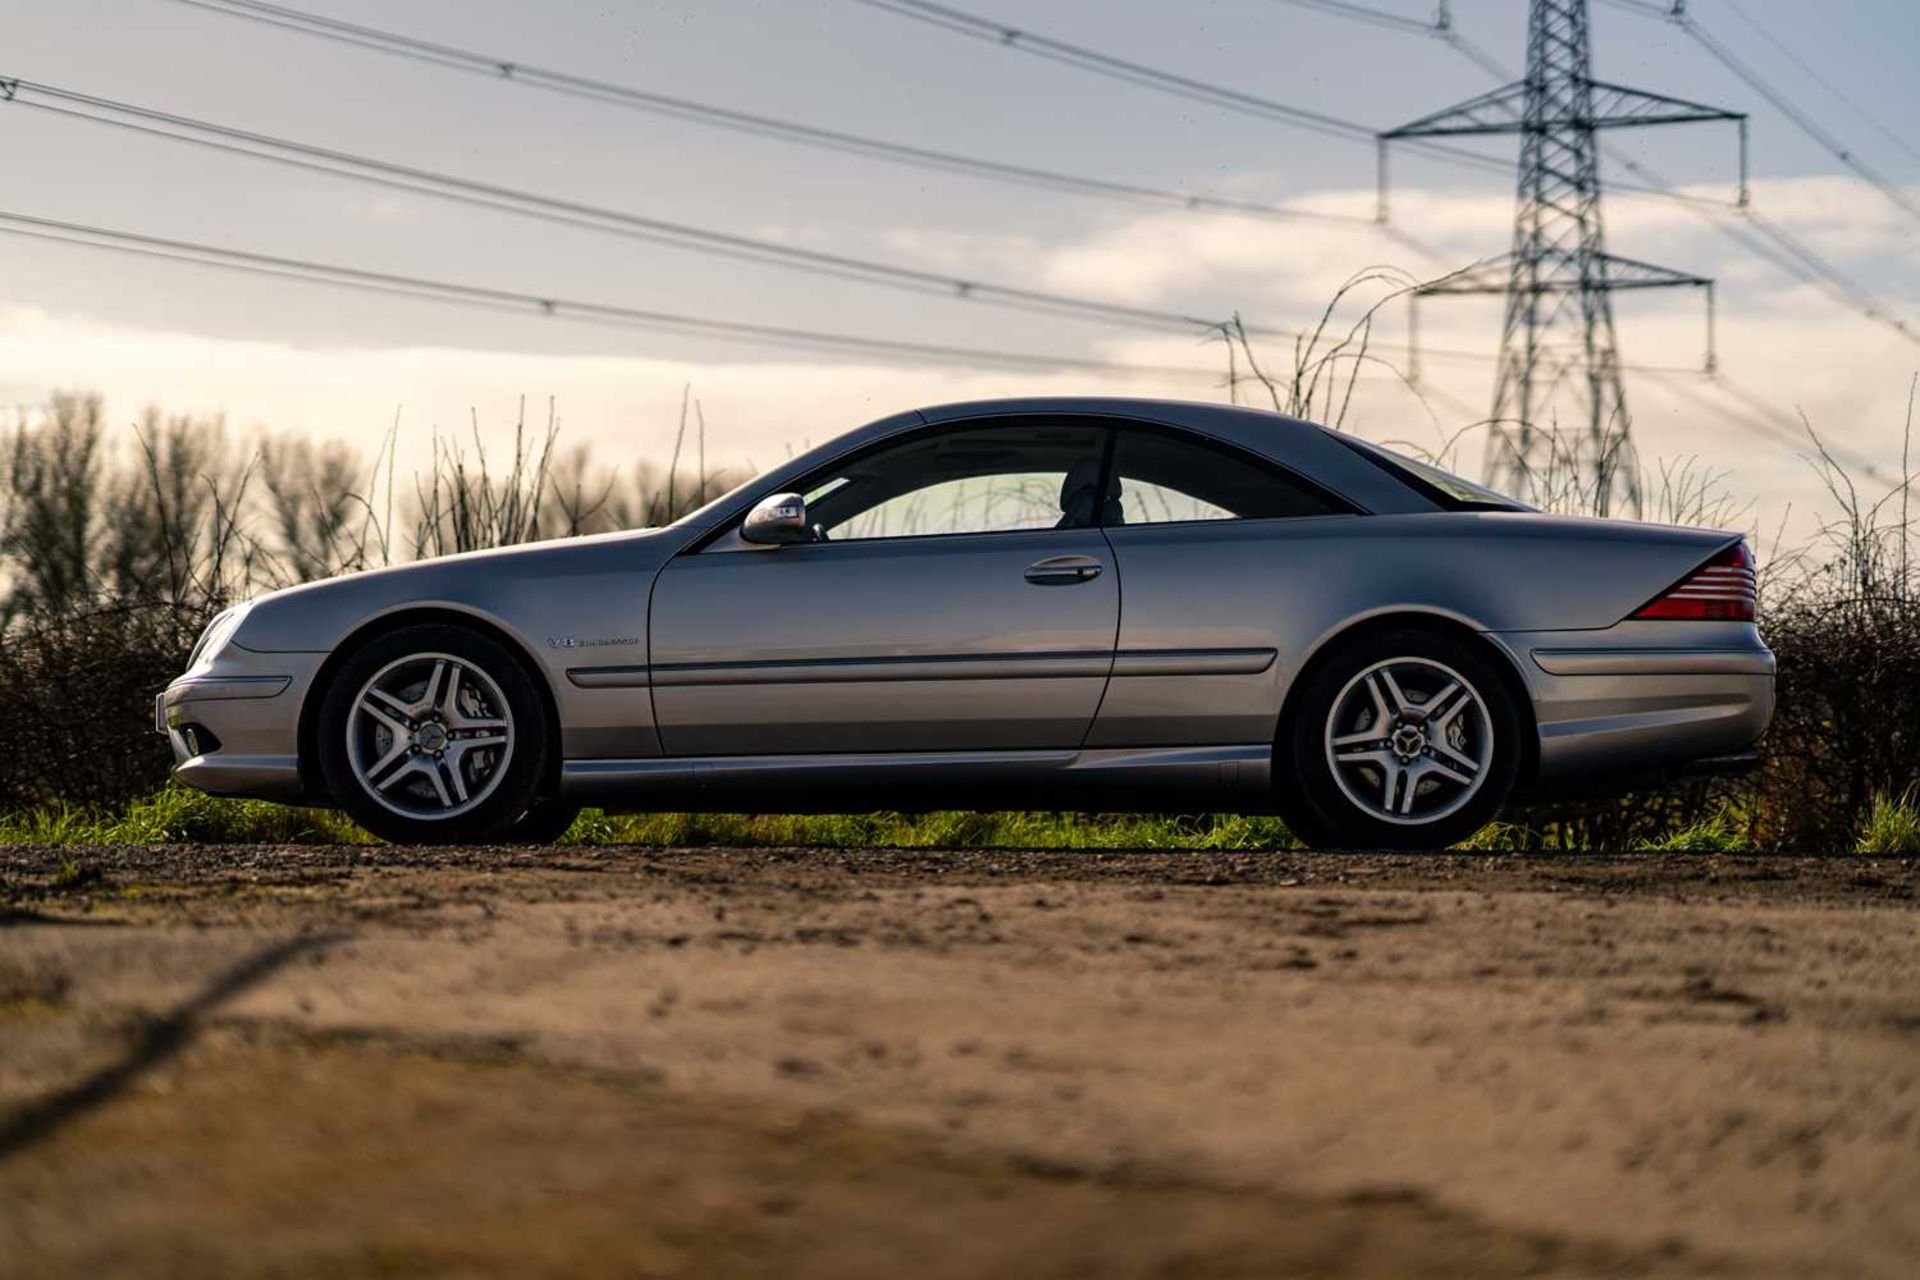 2004 Mercedes CL55 AMG - Image 6 of 52